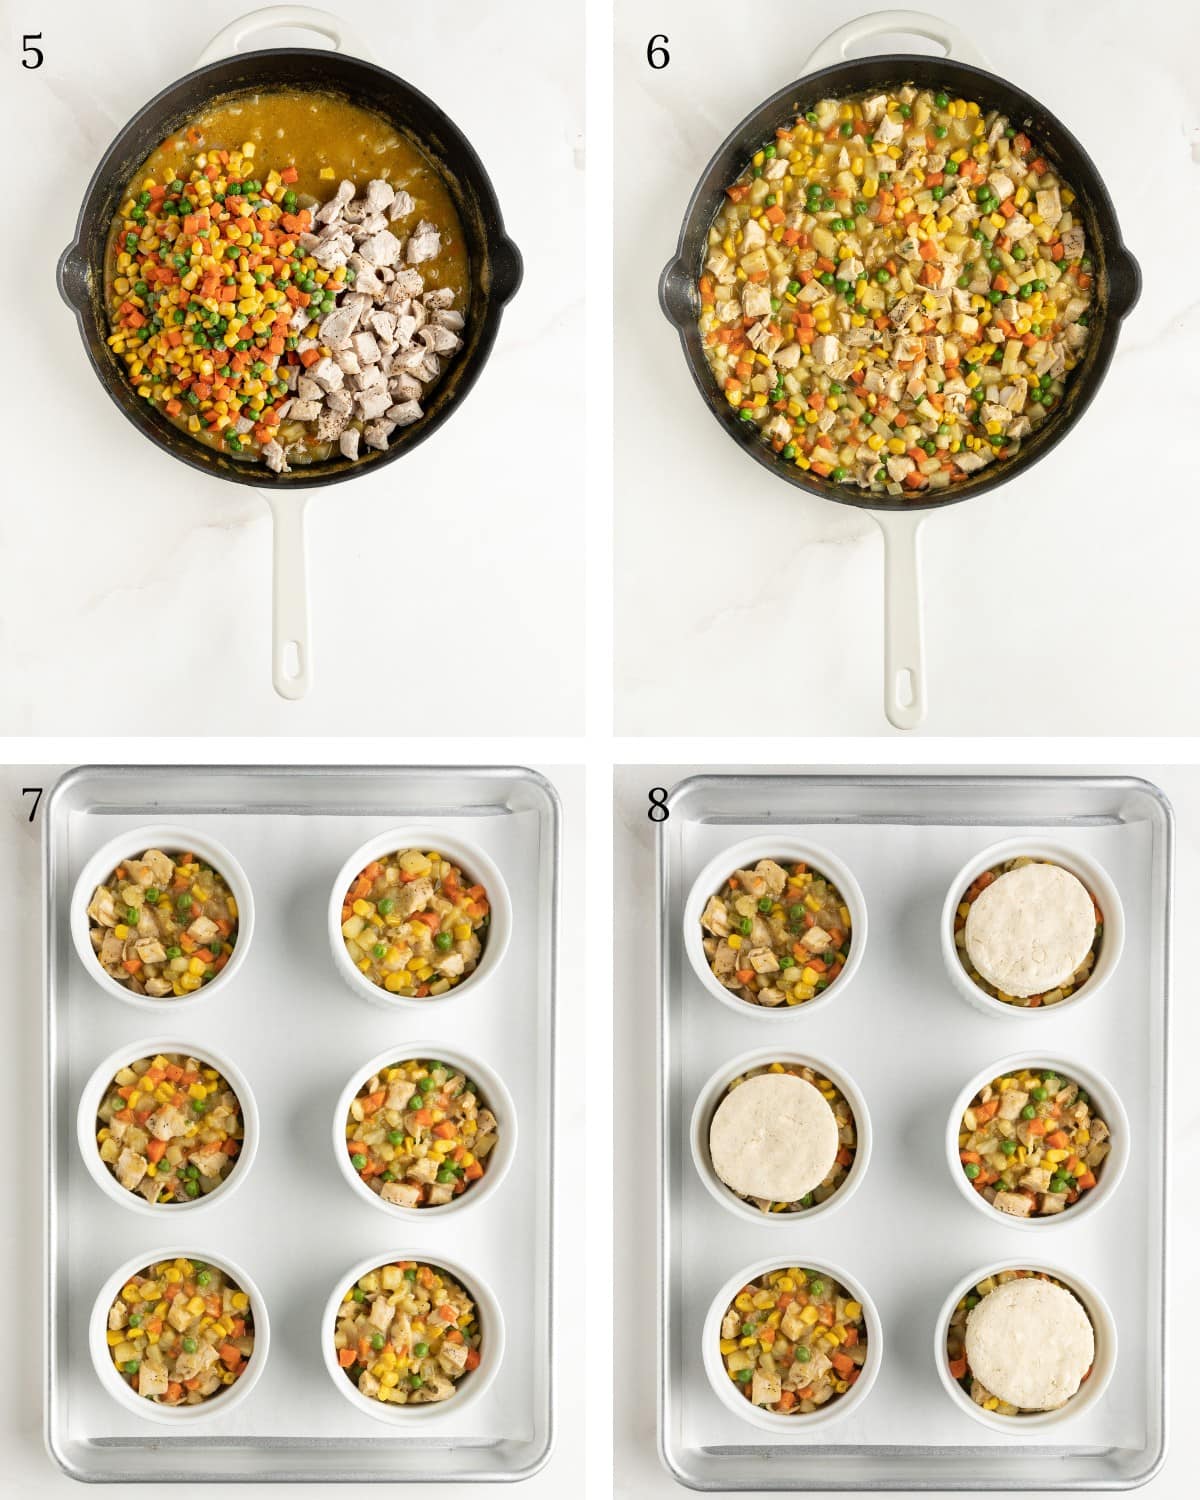 Steps showing how to make gluten-free dairy-free chicken pot pie. Adding the vegetables to the gravy filling, then fill with mini ramekins and top with biscuits. 